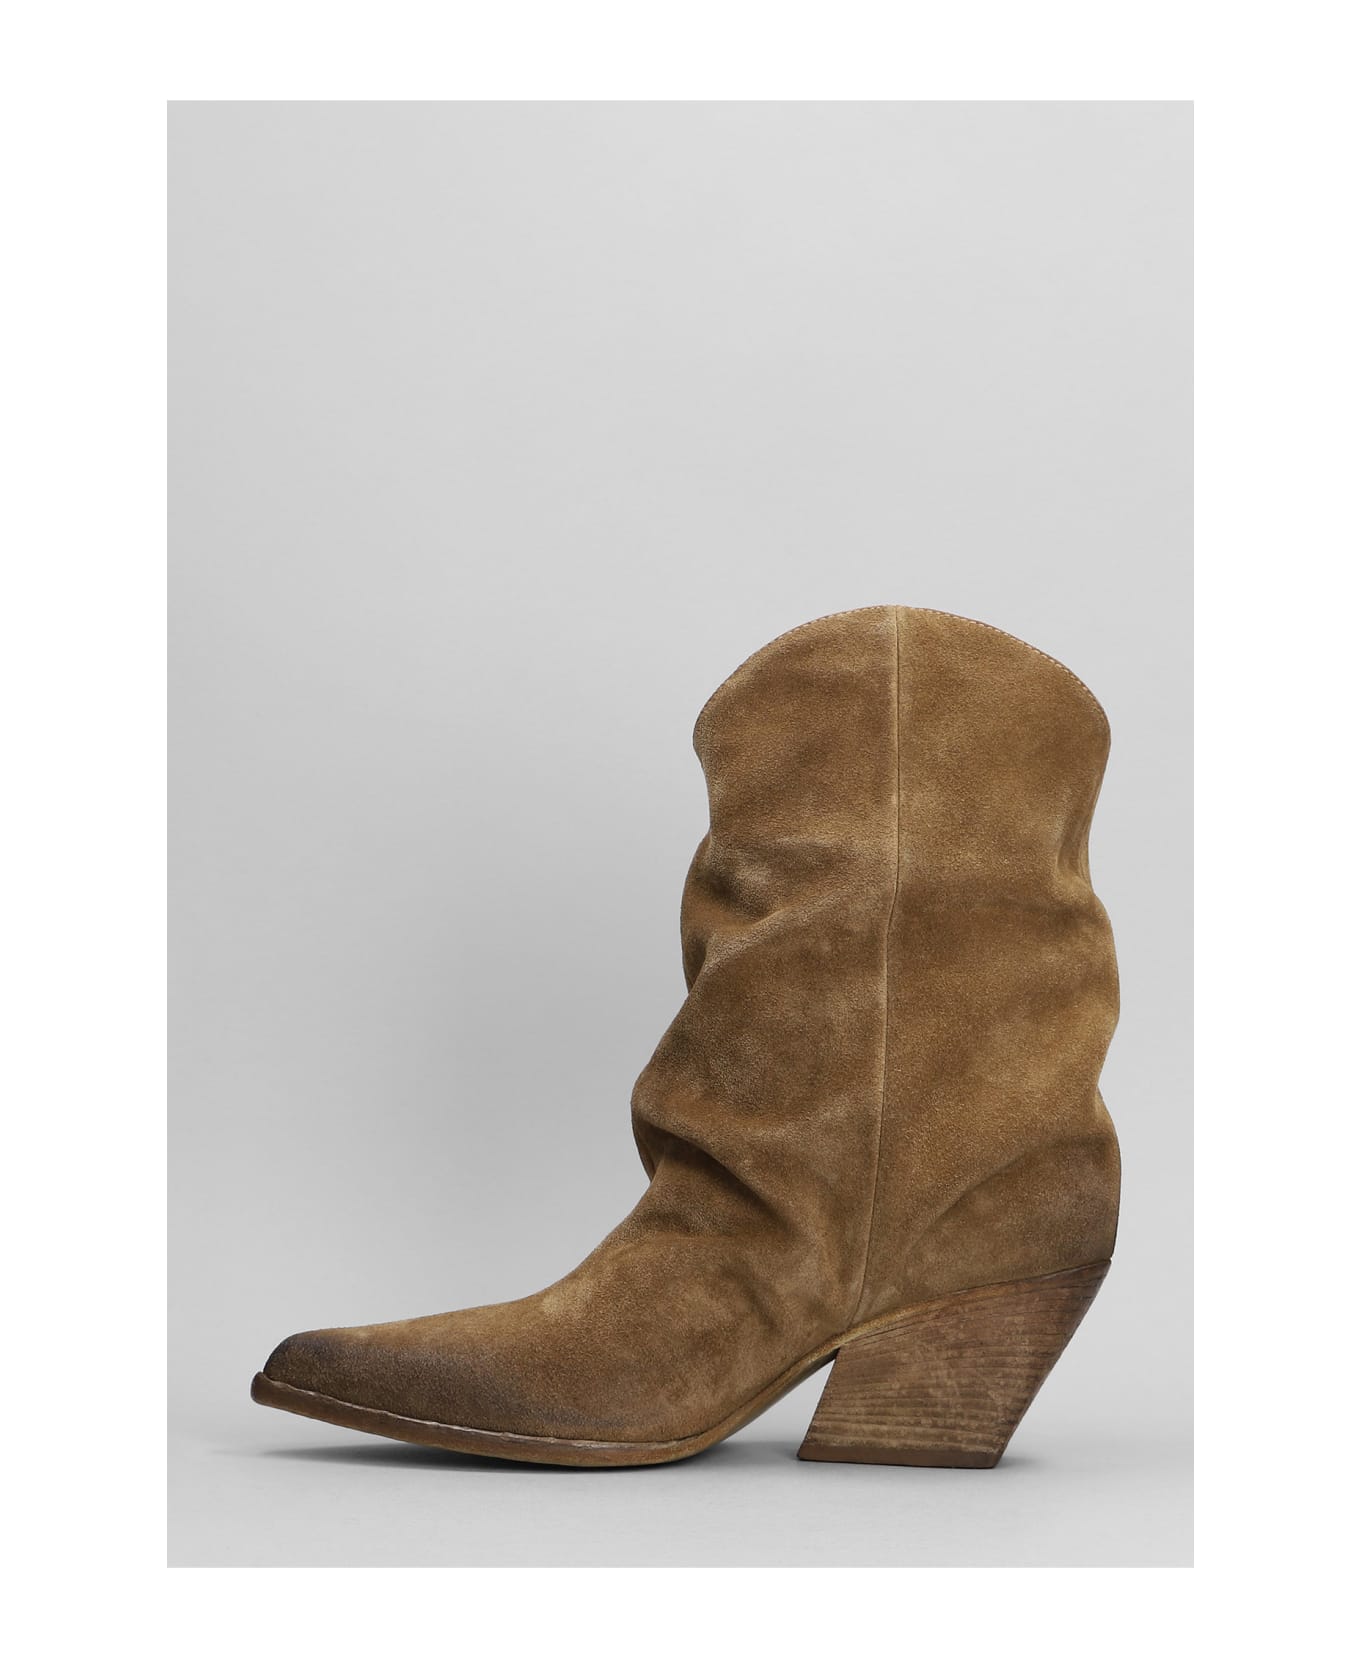 Elena Iachi Low Heels Ankle Boots In Camel Suede - Camel ブーツ